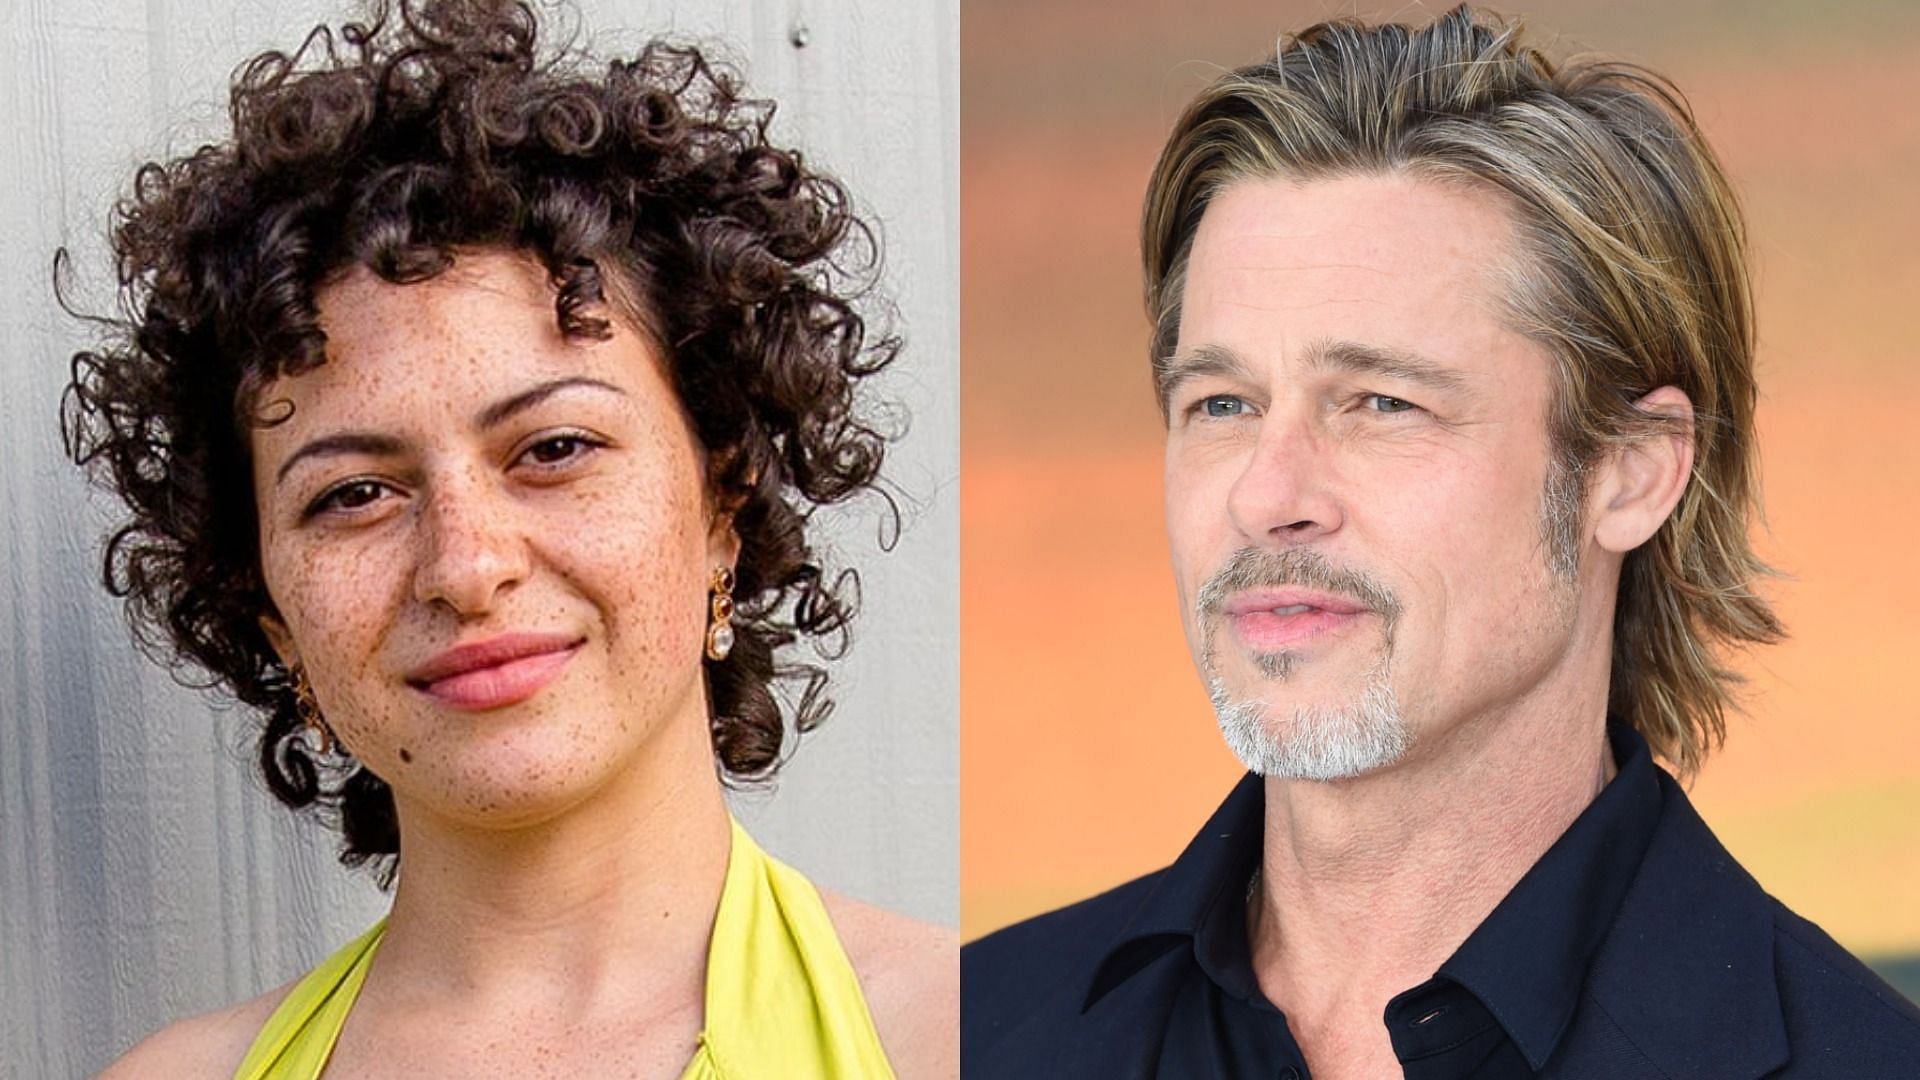 Alia Shawkat cleared up rumors about dating Brad Pitt (Images via Getty and Shutterstock)